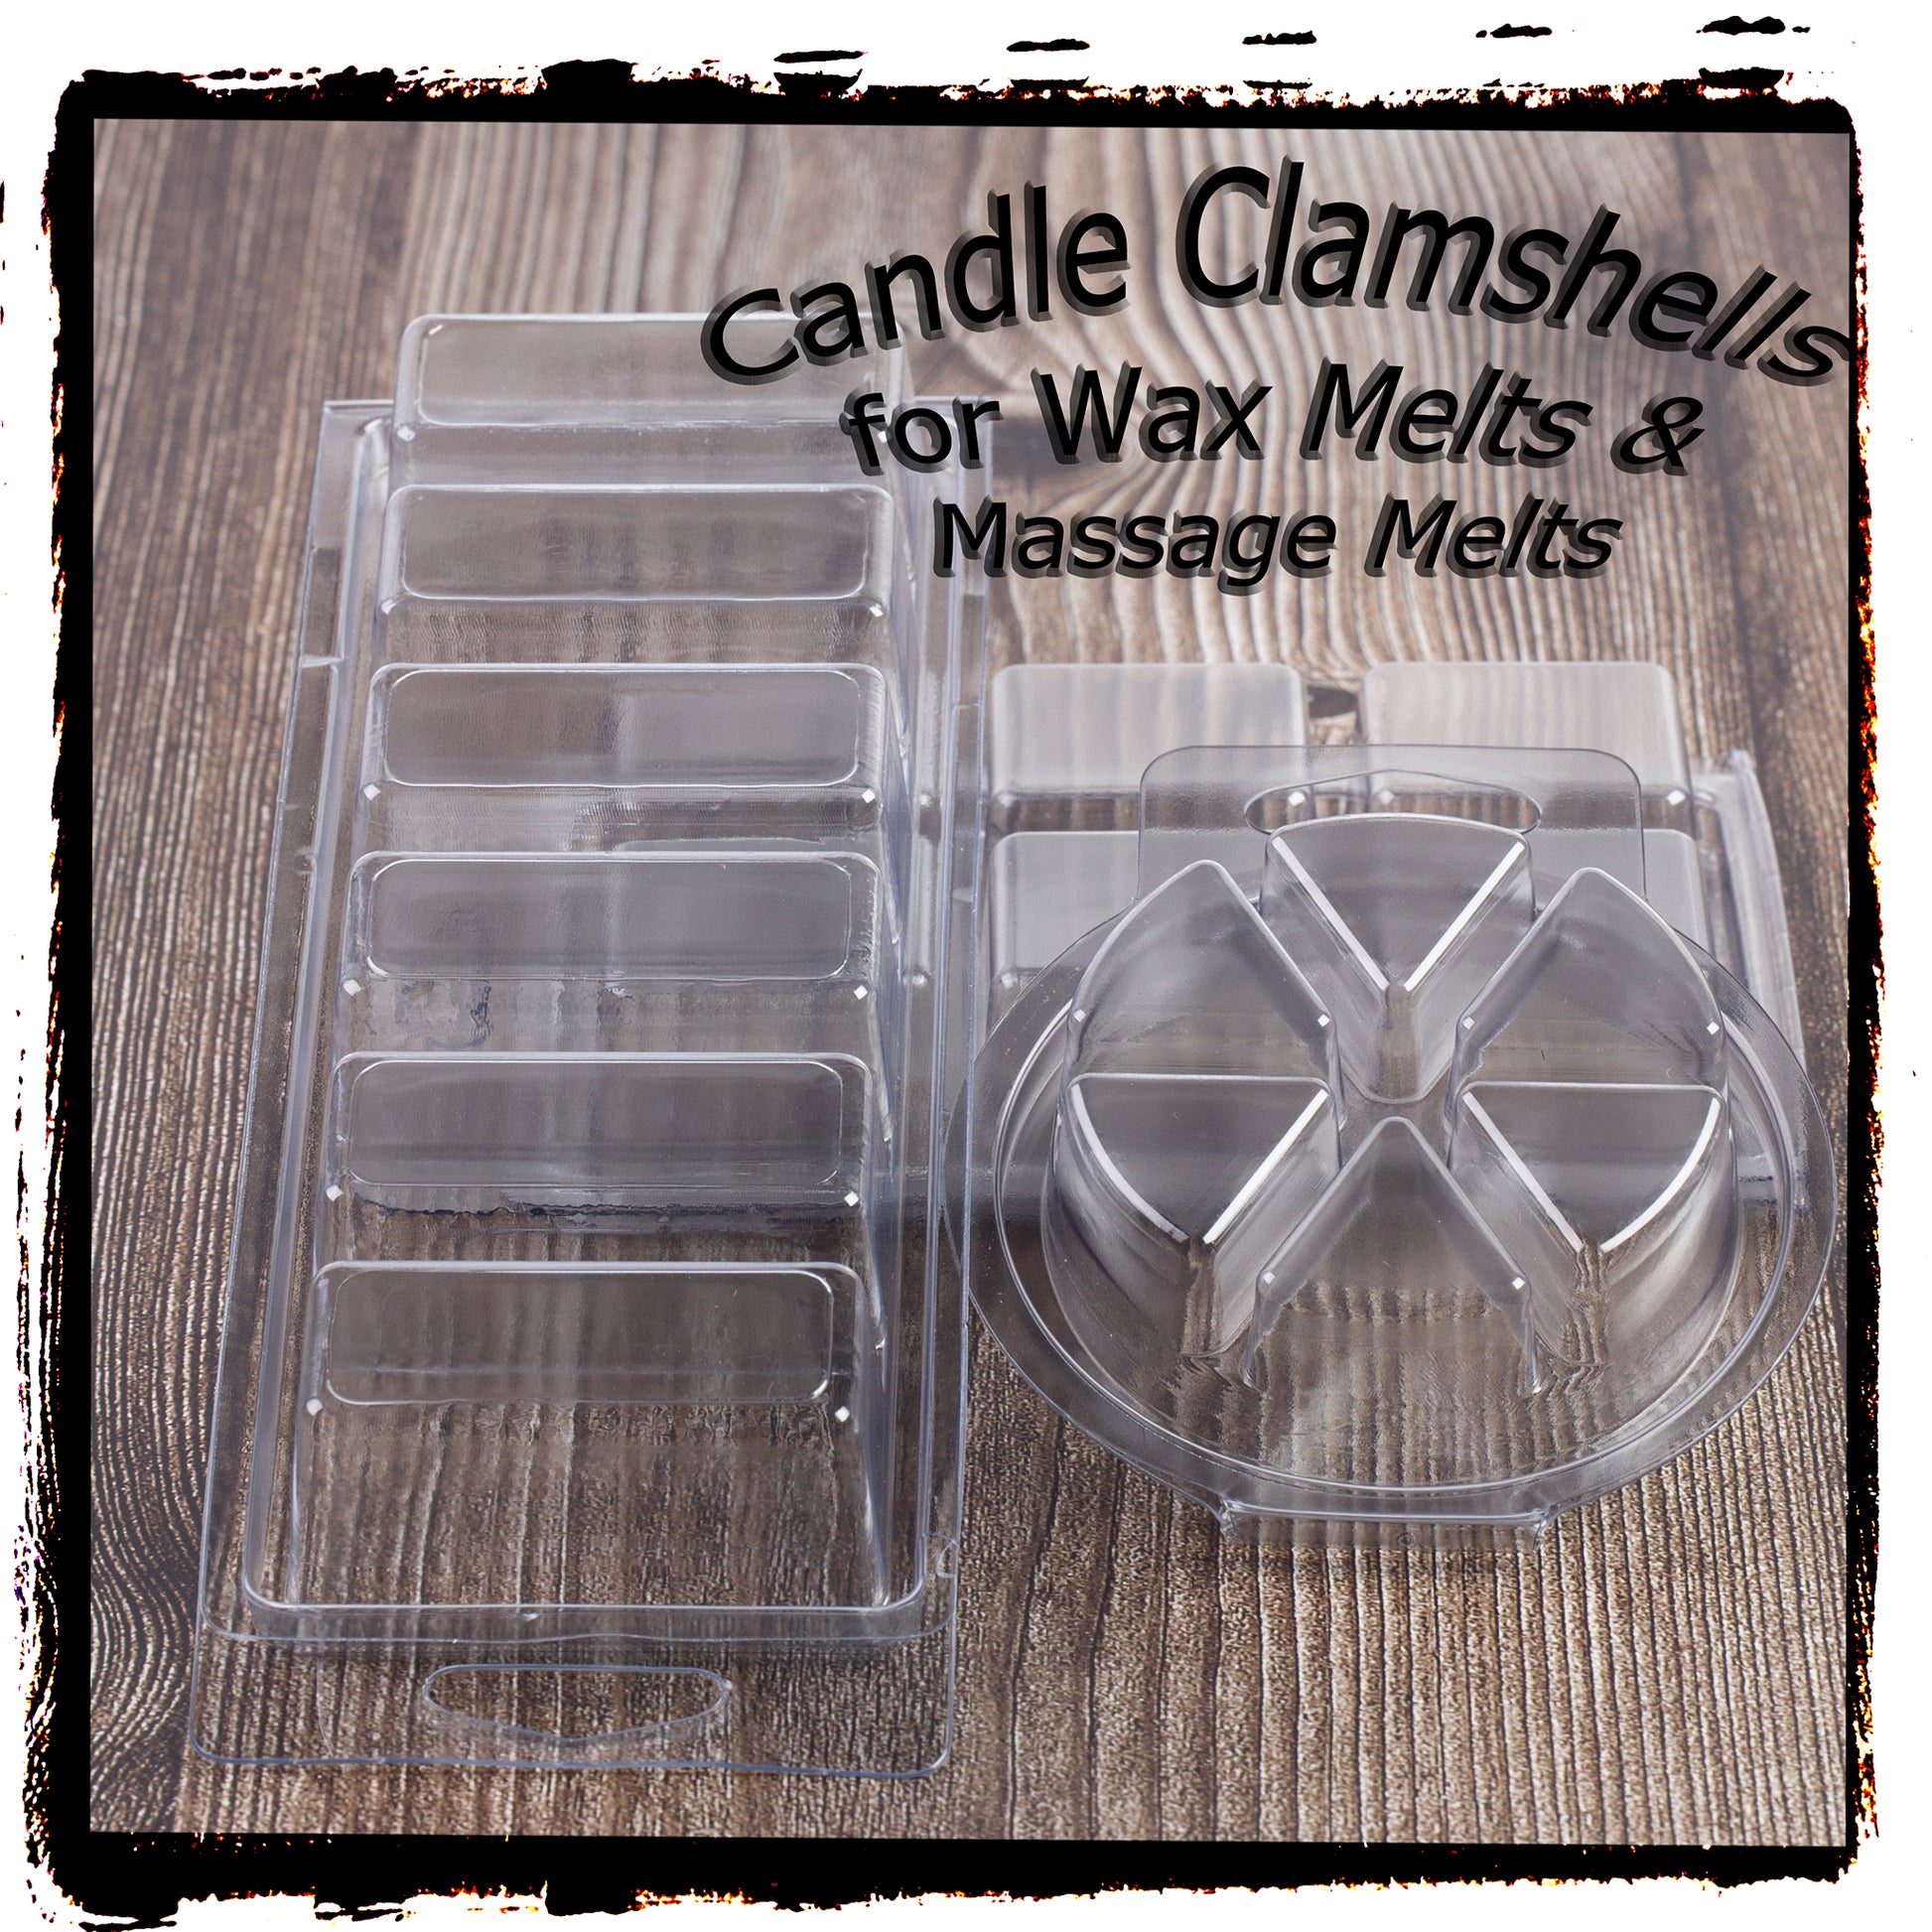 ElRoma 50 Pack Wax Melt Containers Clamshells for Wax Melts The 5 Cell Wax  Melt Molds are Easy to use Wax Molds for Melts DIY Wax Melts containers are  Clear